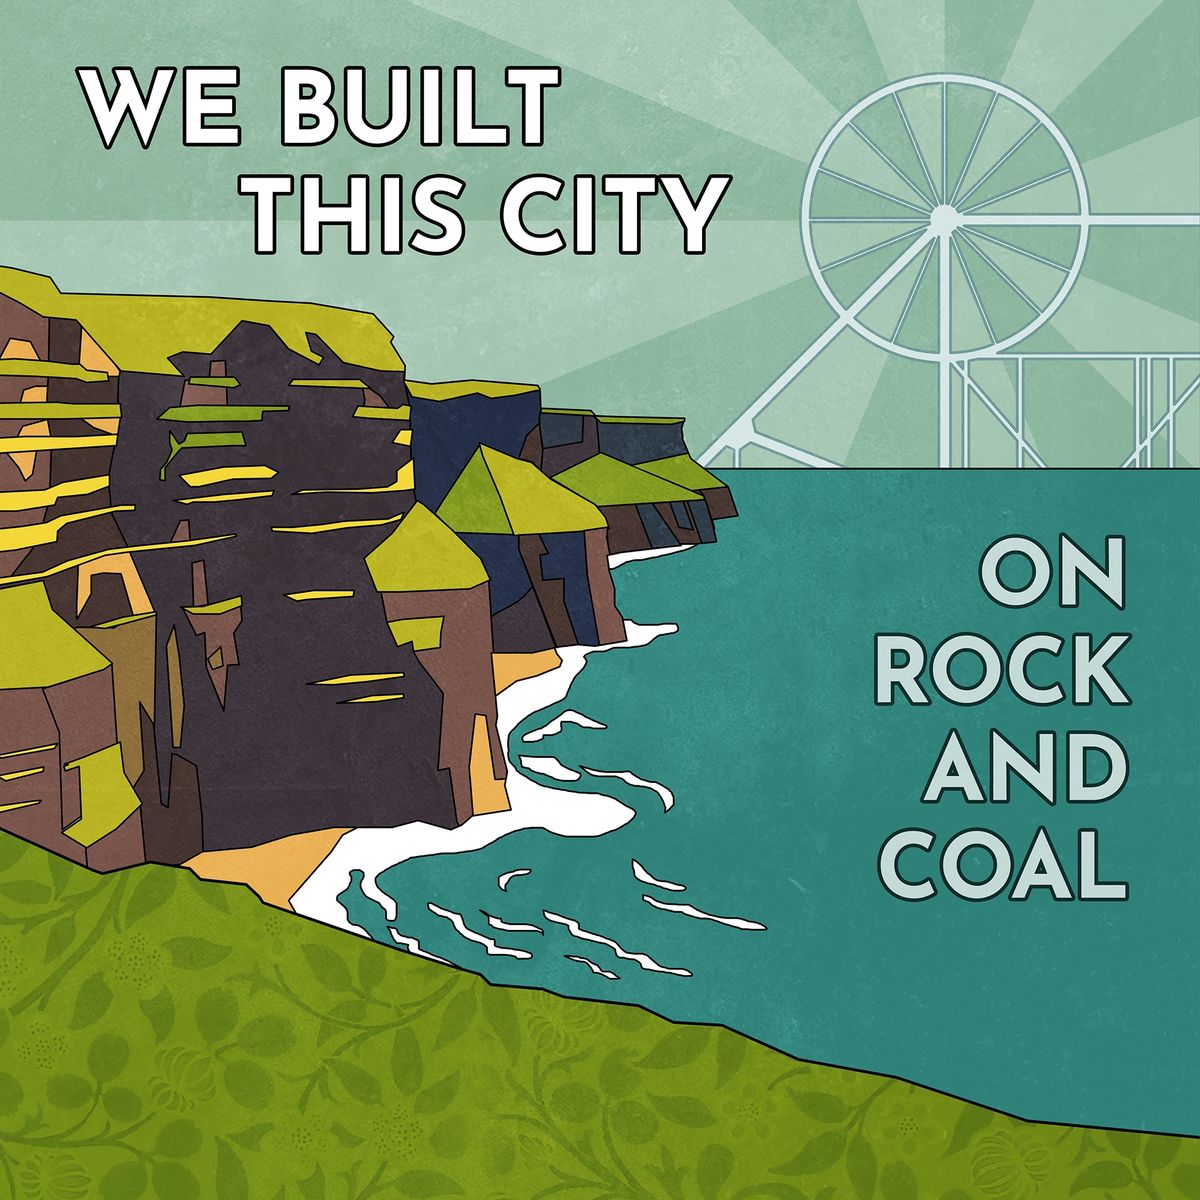 We Built This City on Rock and Coal